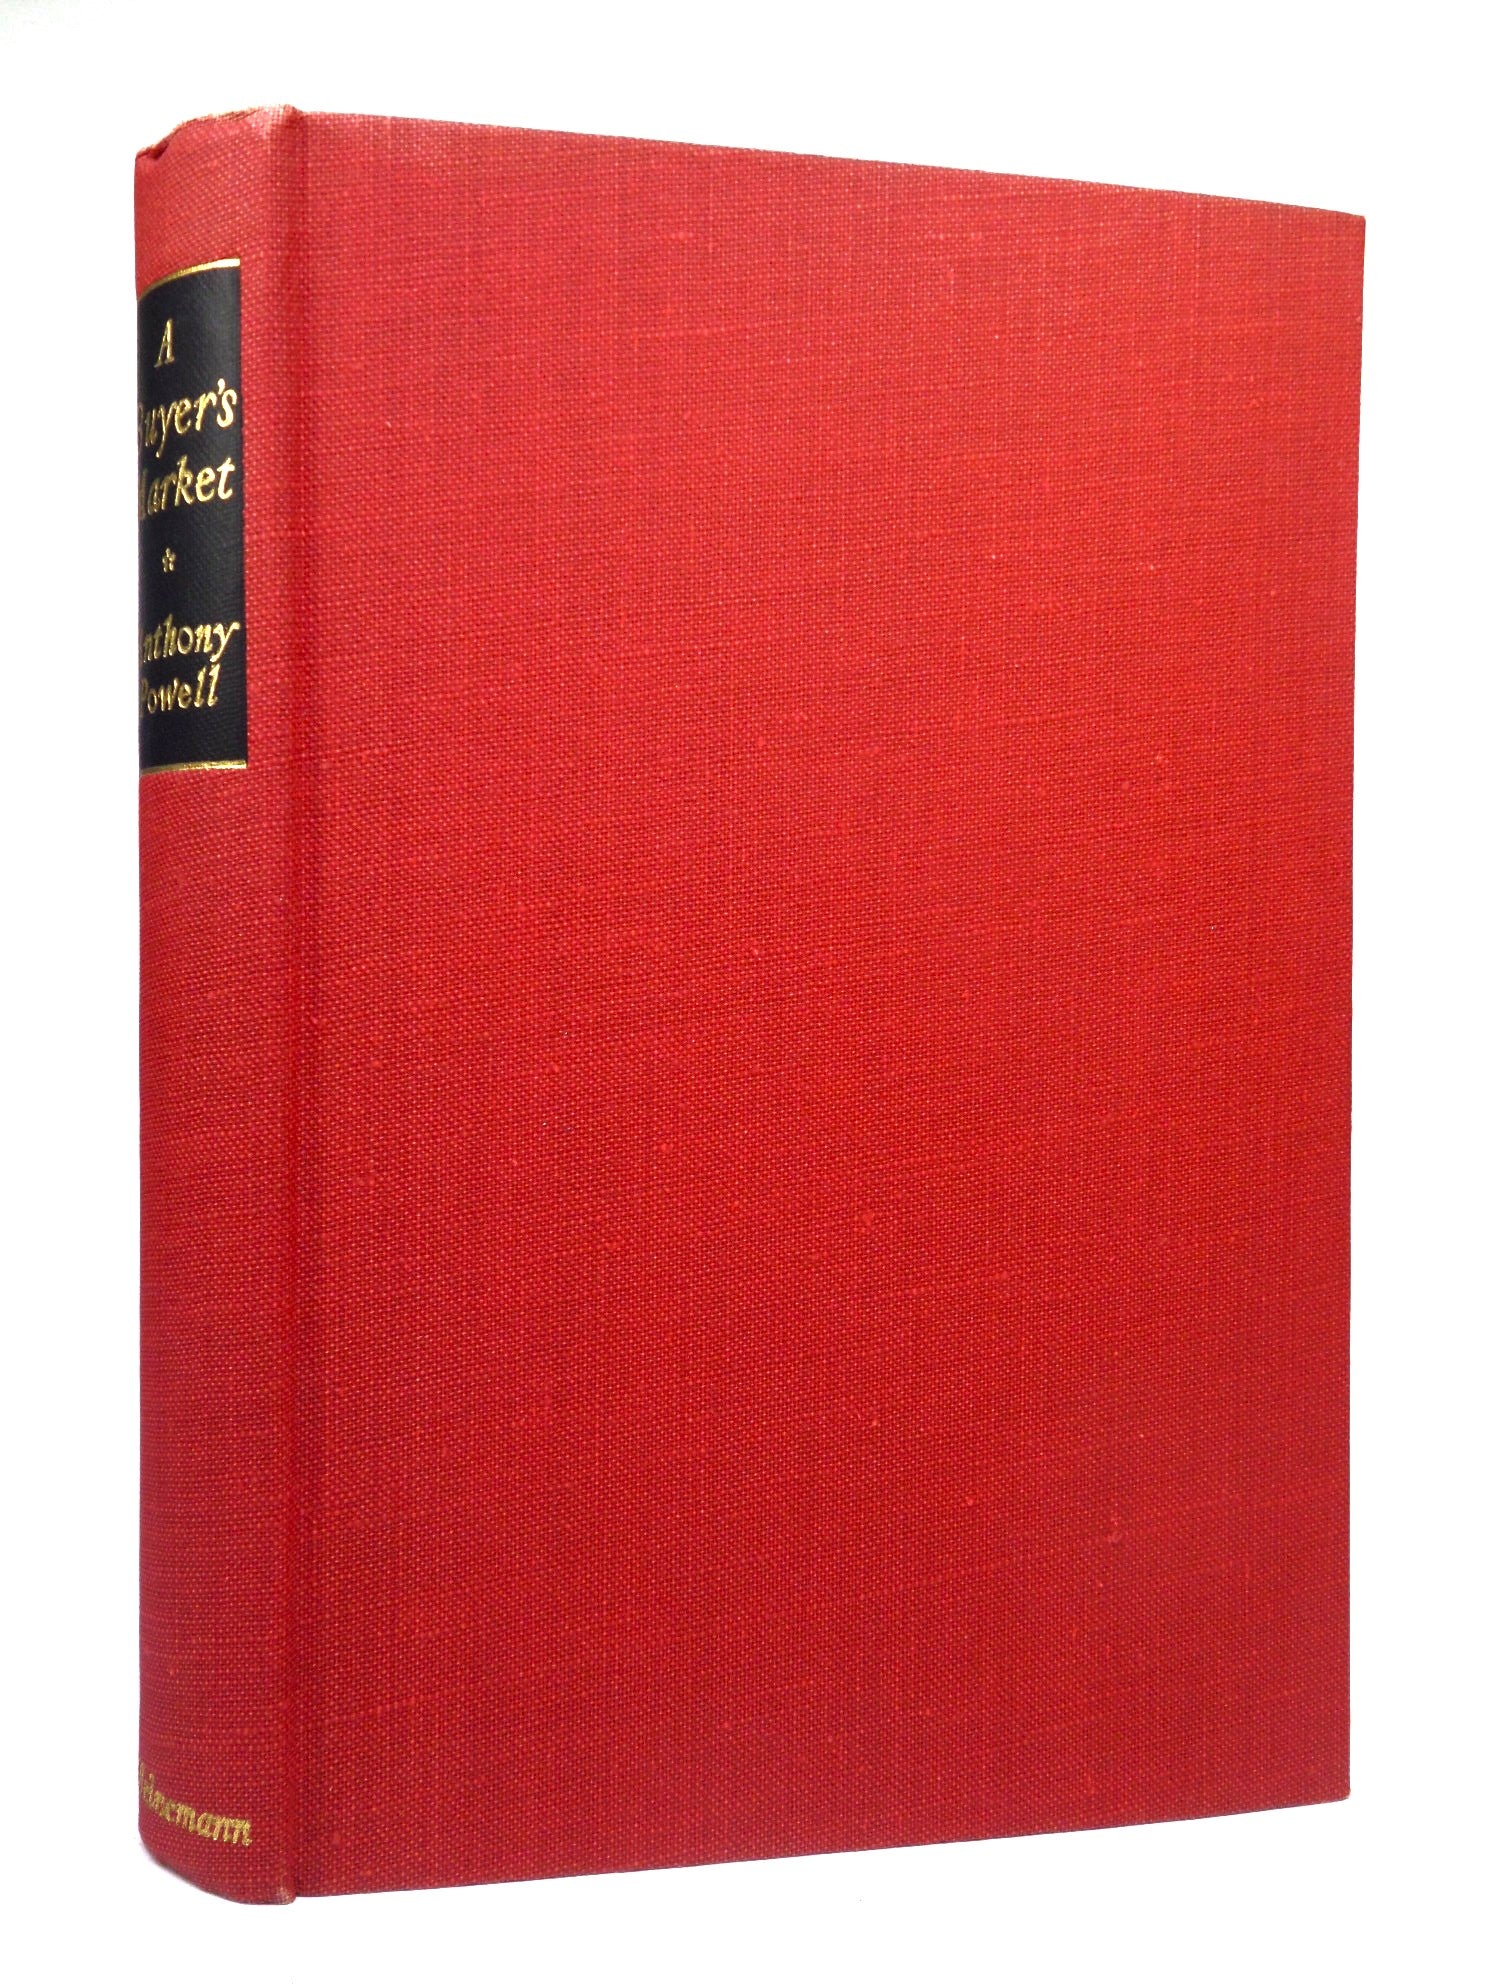 A BUYER'S MARKET BY ANTHONY POWELL 1952 FIRST EDITION